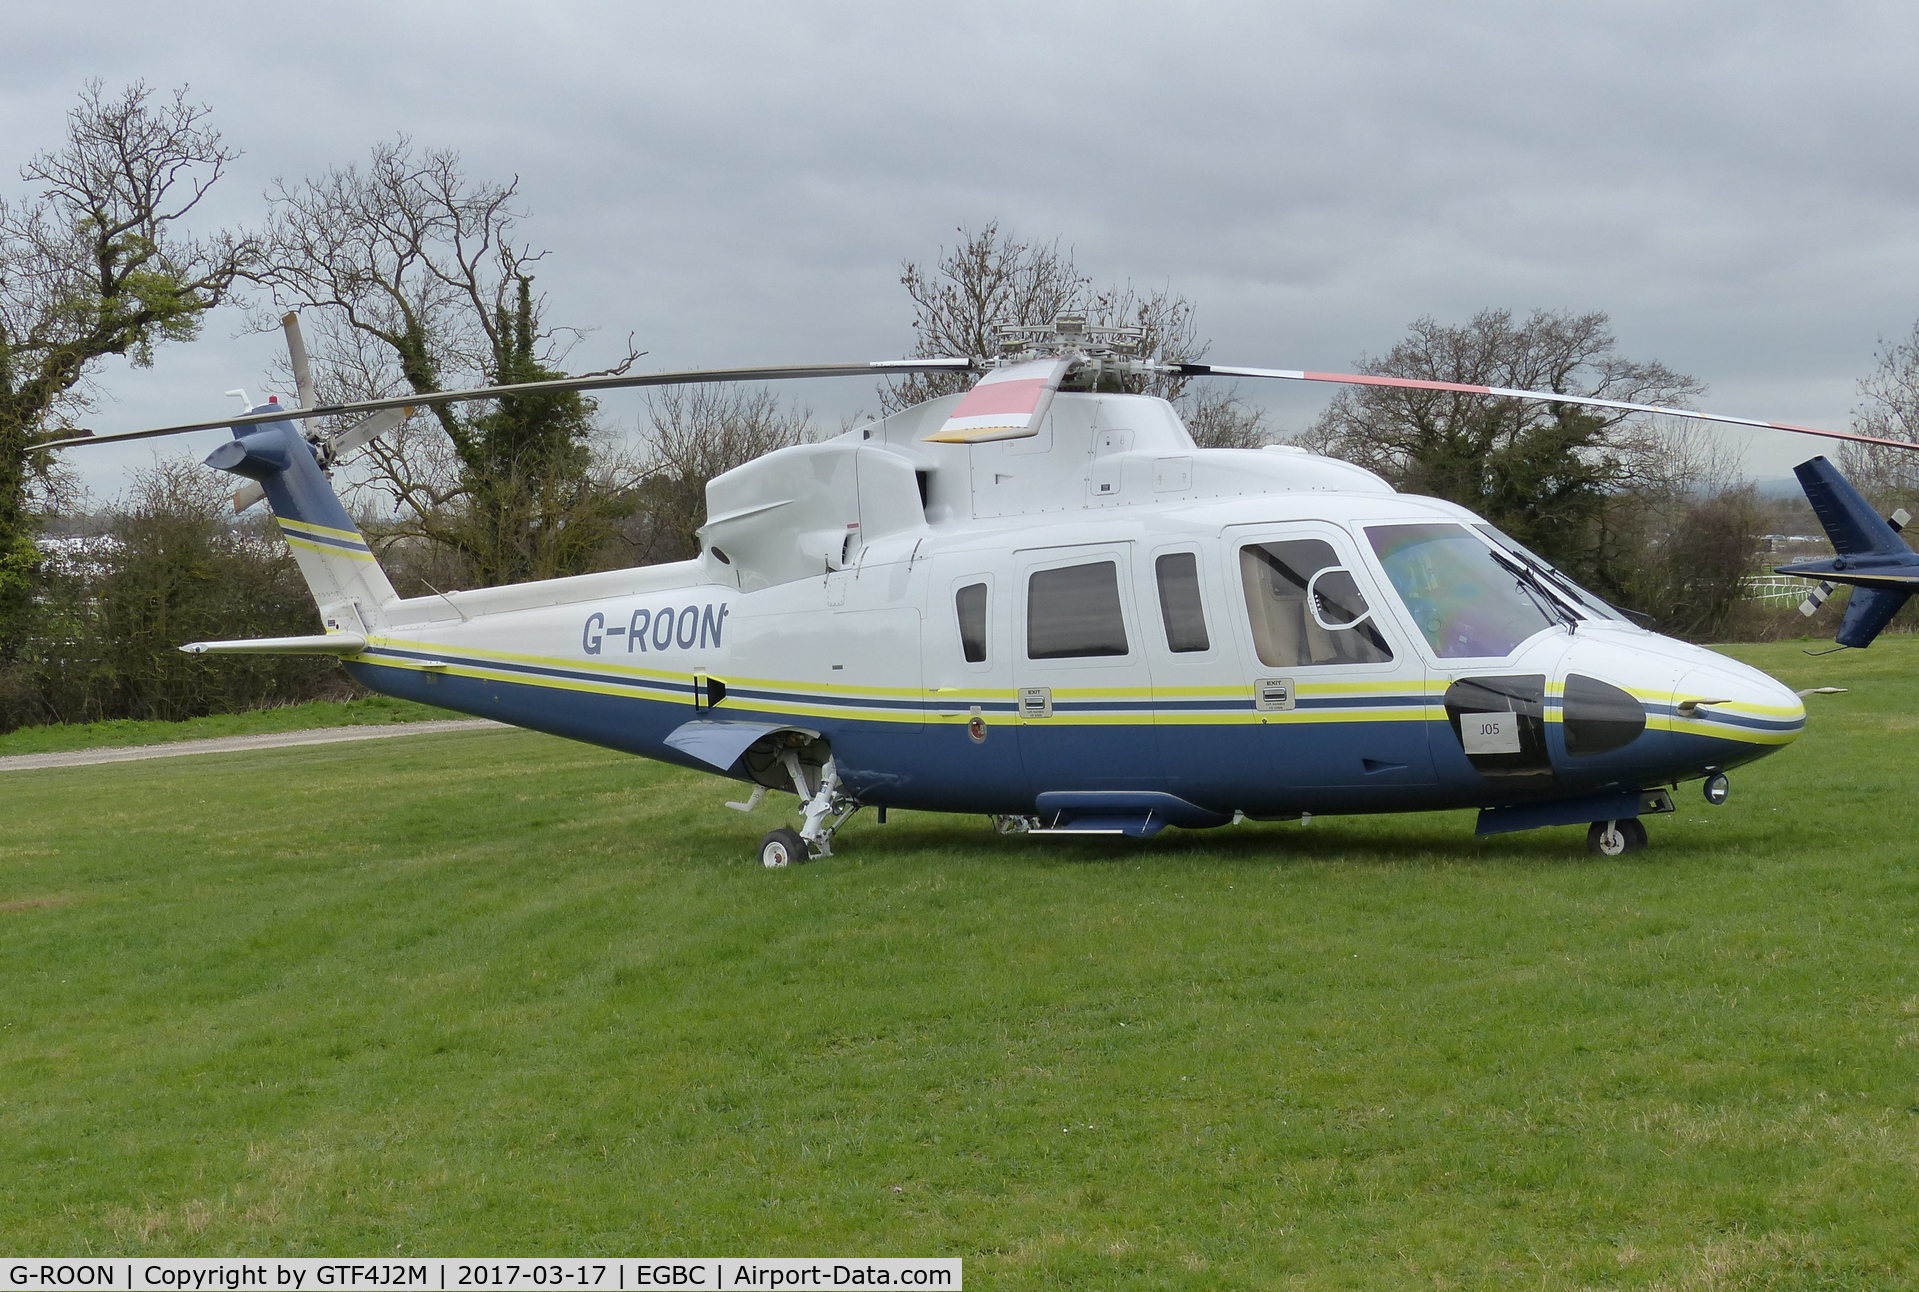 G-ROON, 2010 Keystone Helicopter S-76C C/N 760781, G-ROON at Cheltenham 17.3.17